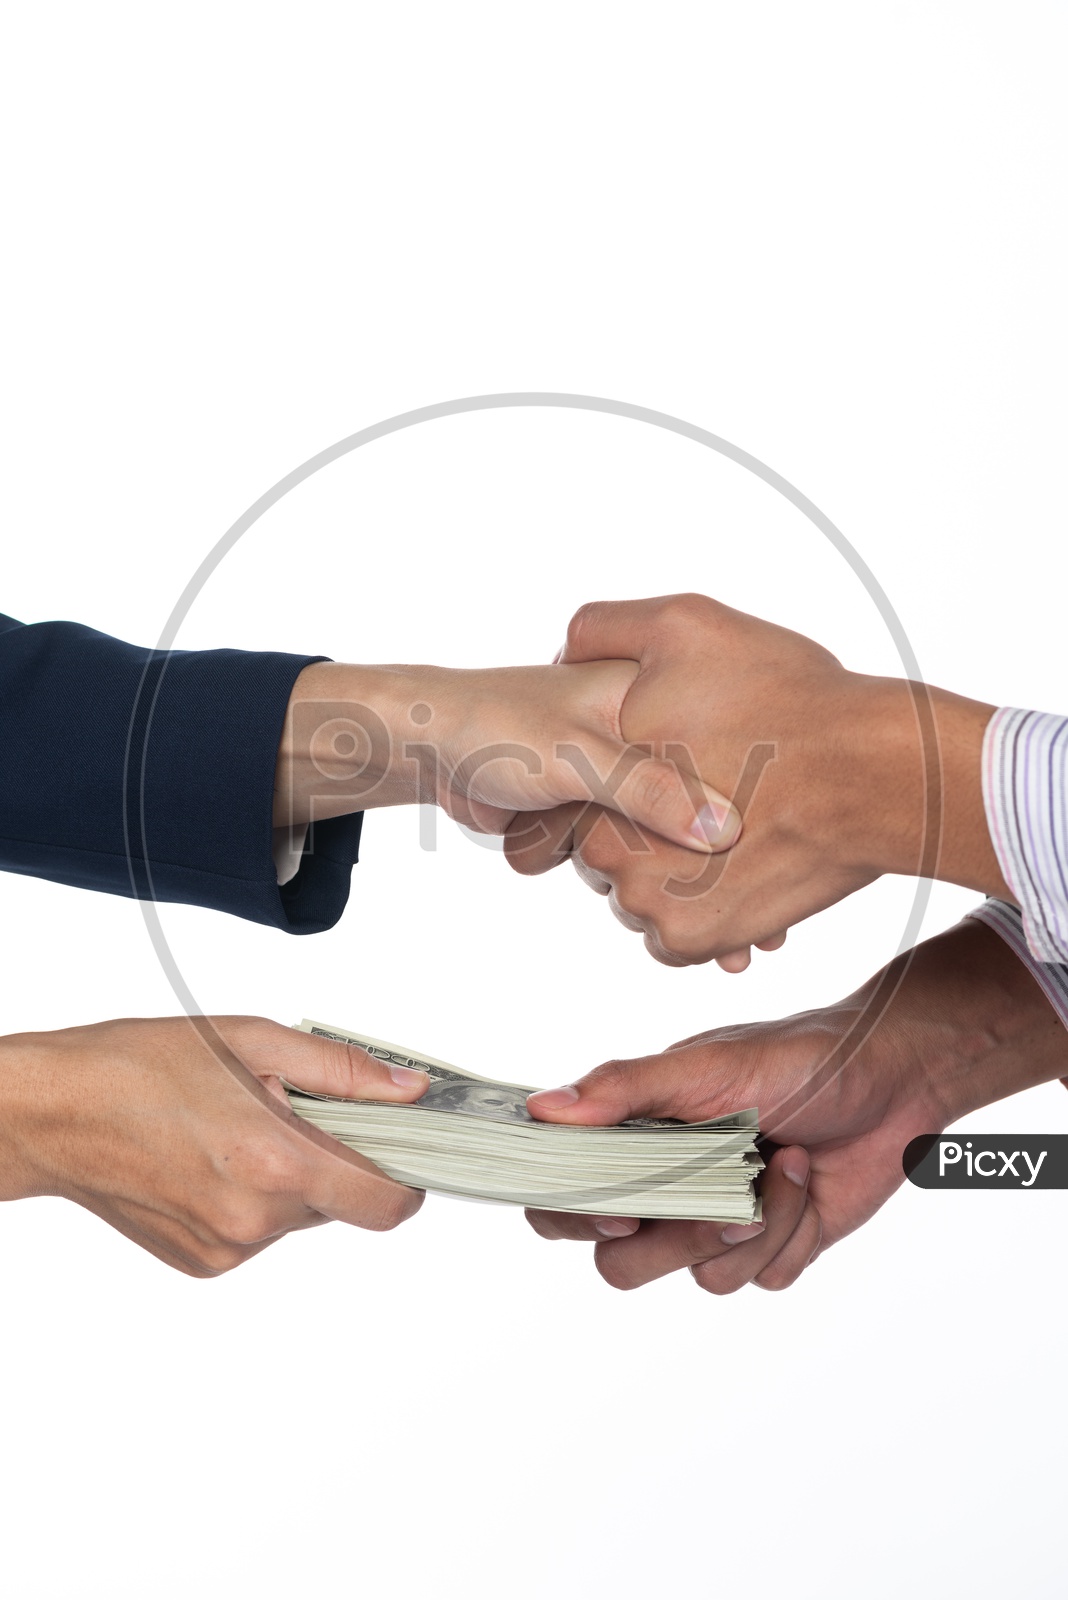 Money Transfer Between Business man With a Deal Concept